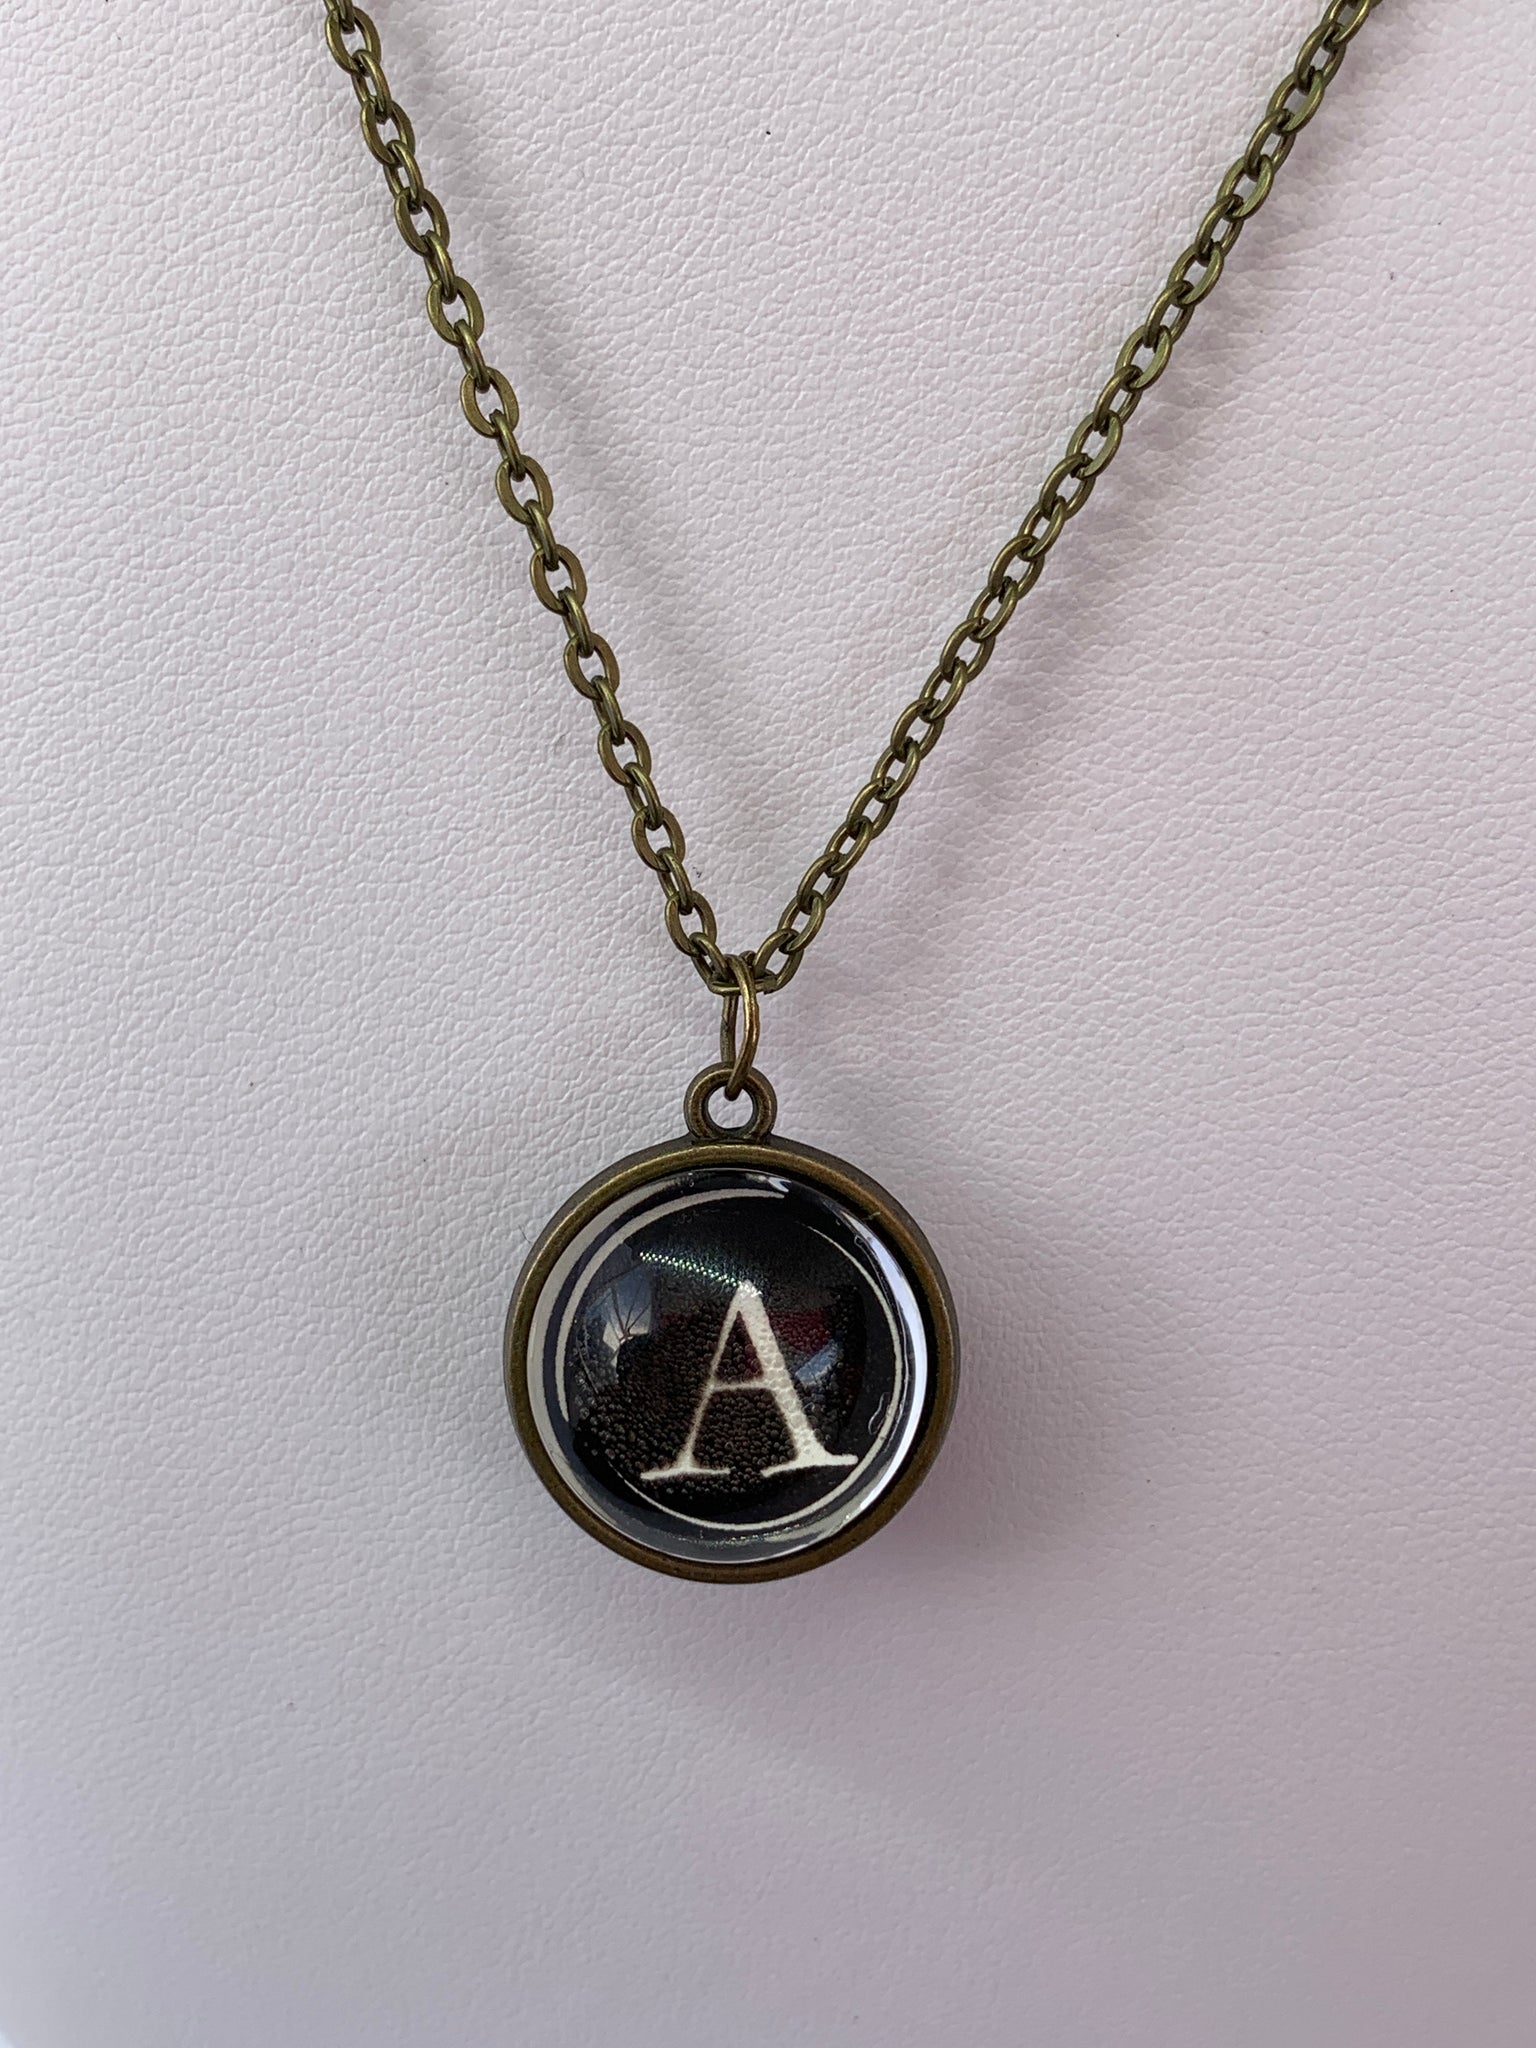 Double Sided Letter Necklace White Text on Black Background